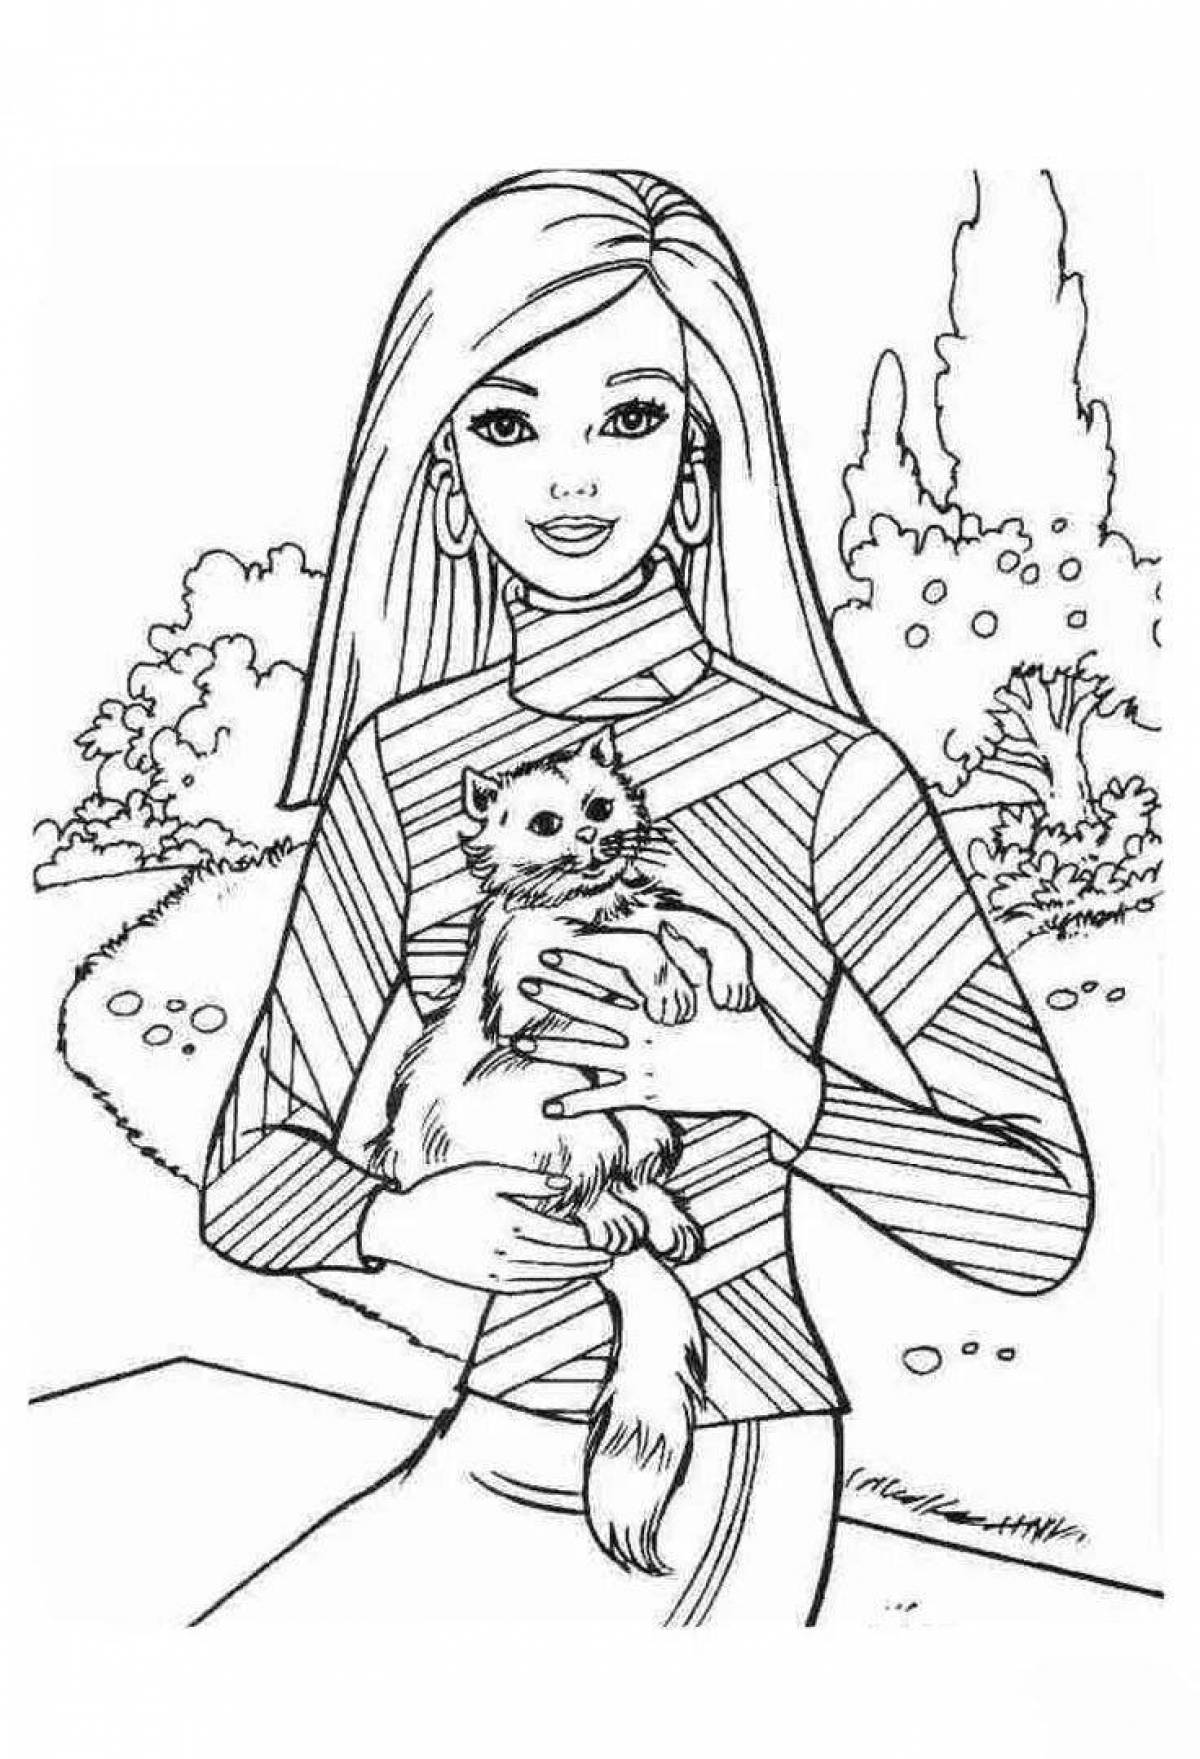 Dazzling old barbie coloring book